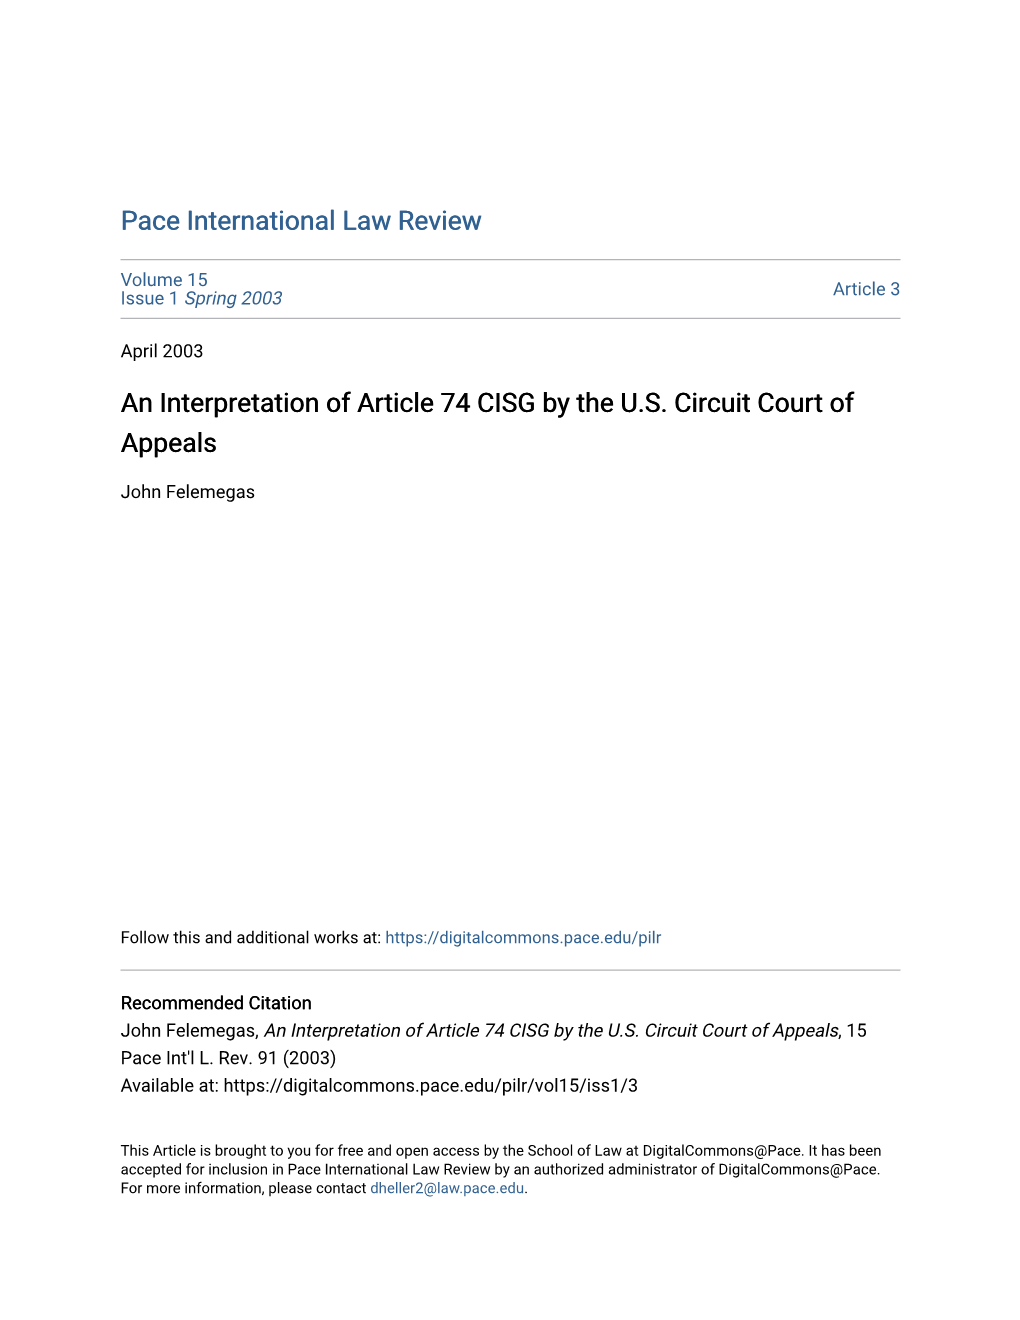 An Interpretation of Article 74 CISG by the U.S. Circuit Court of Appeals